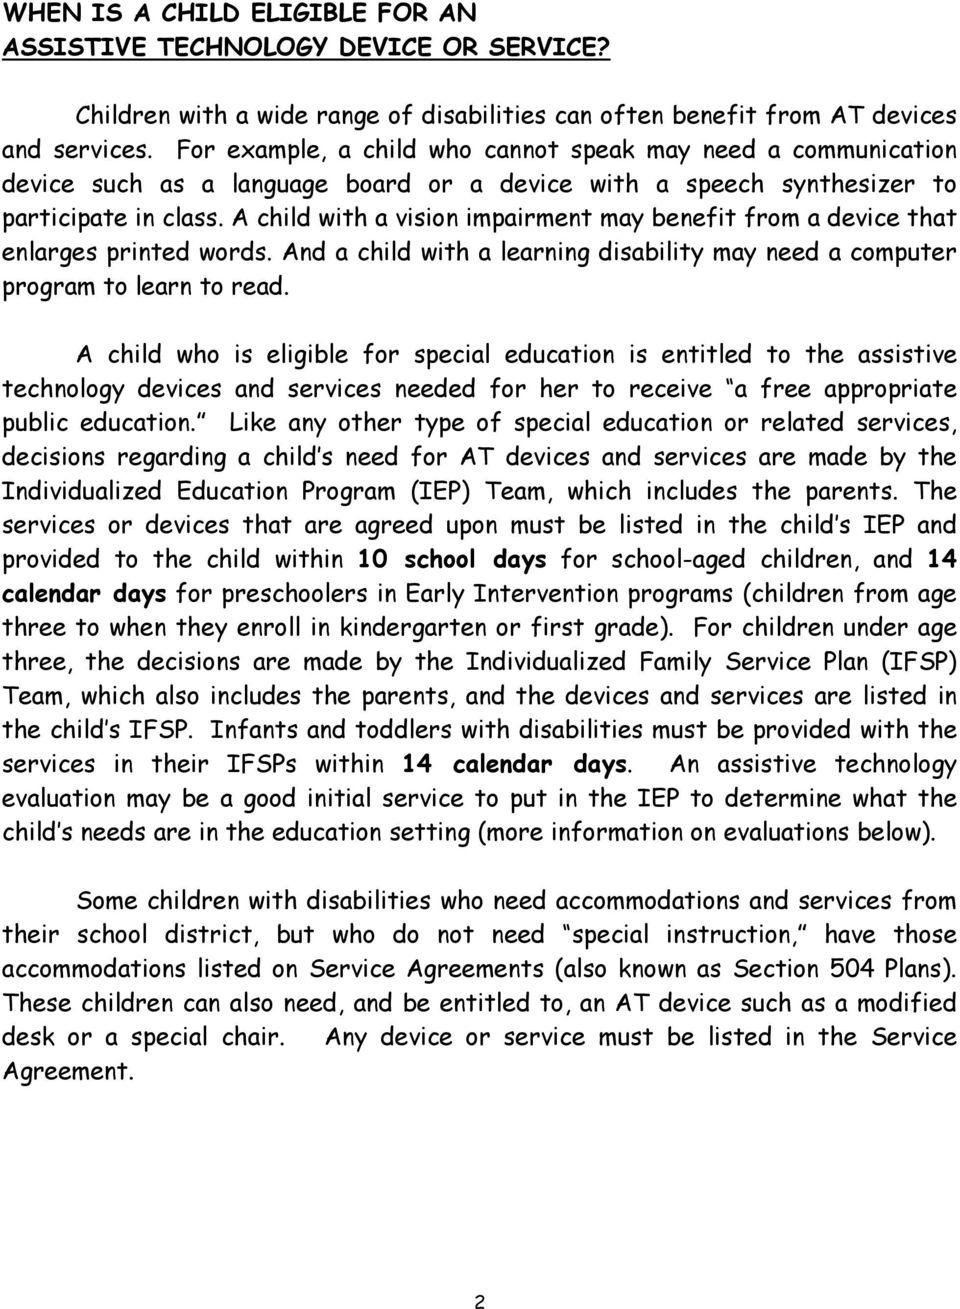 A child with a vision impairment may benefit from a device that enlarges printed words. And a child with a learning disability may need a computer program to learn to read.